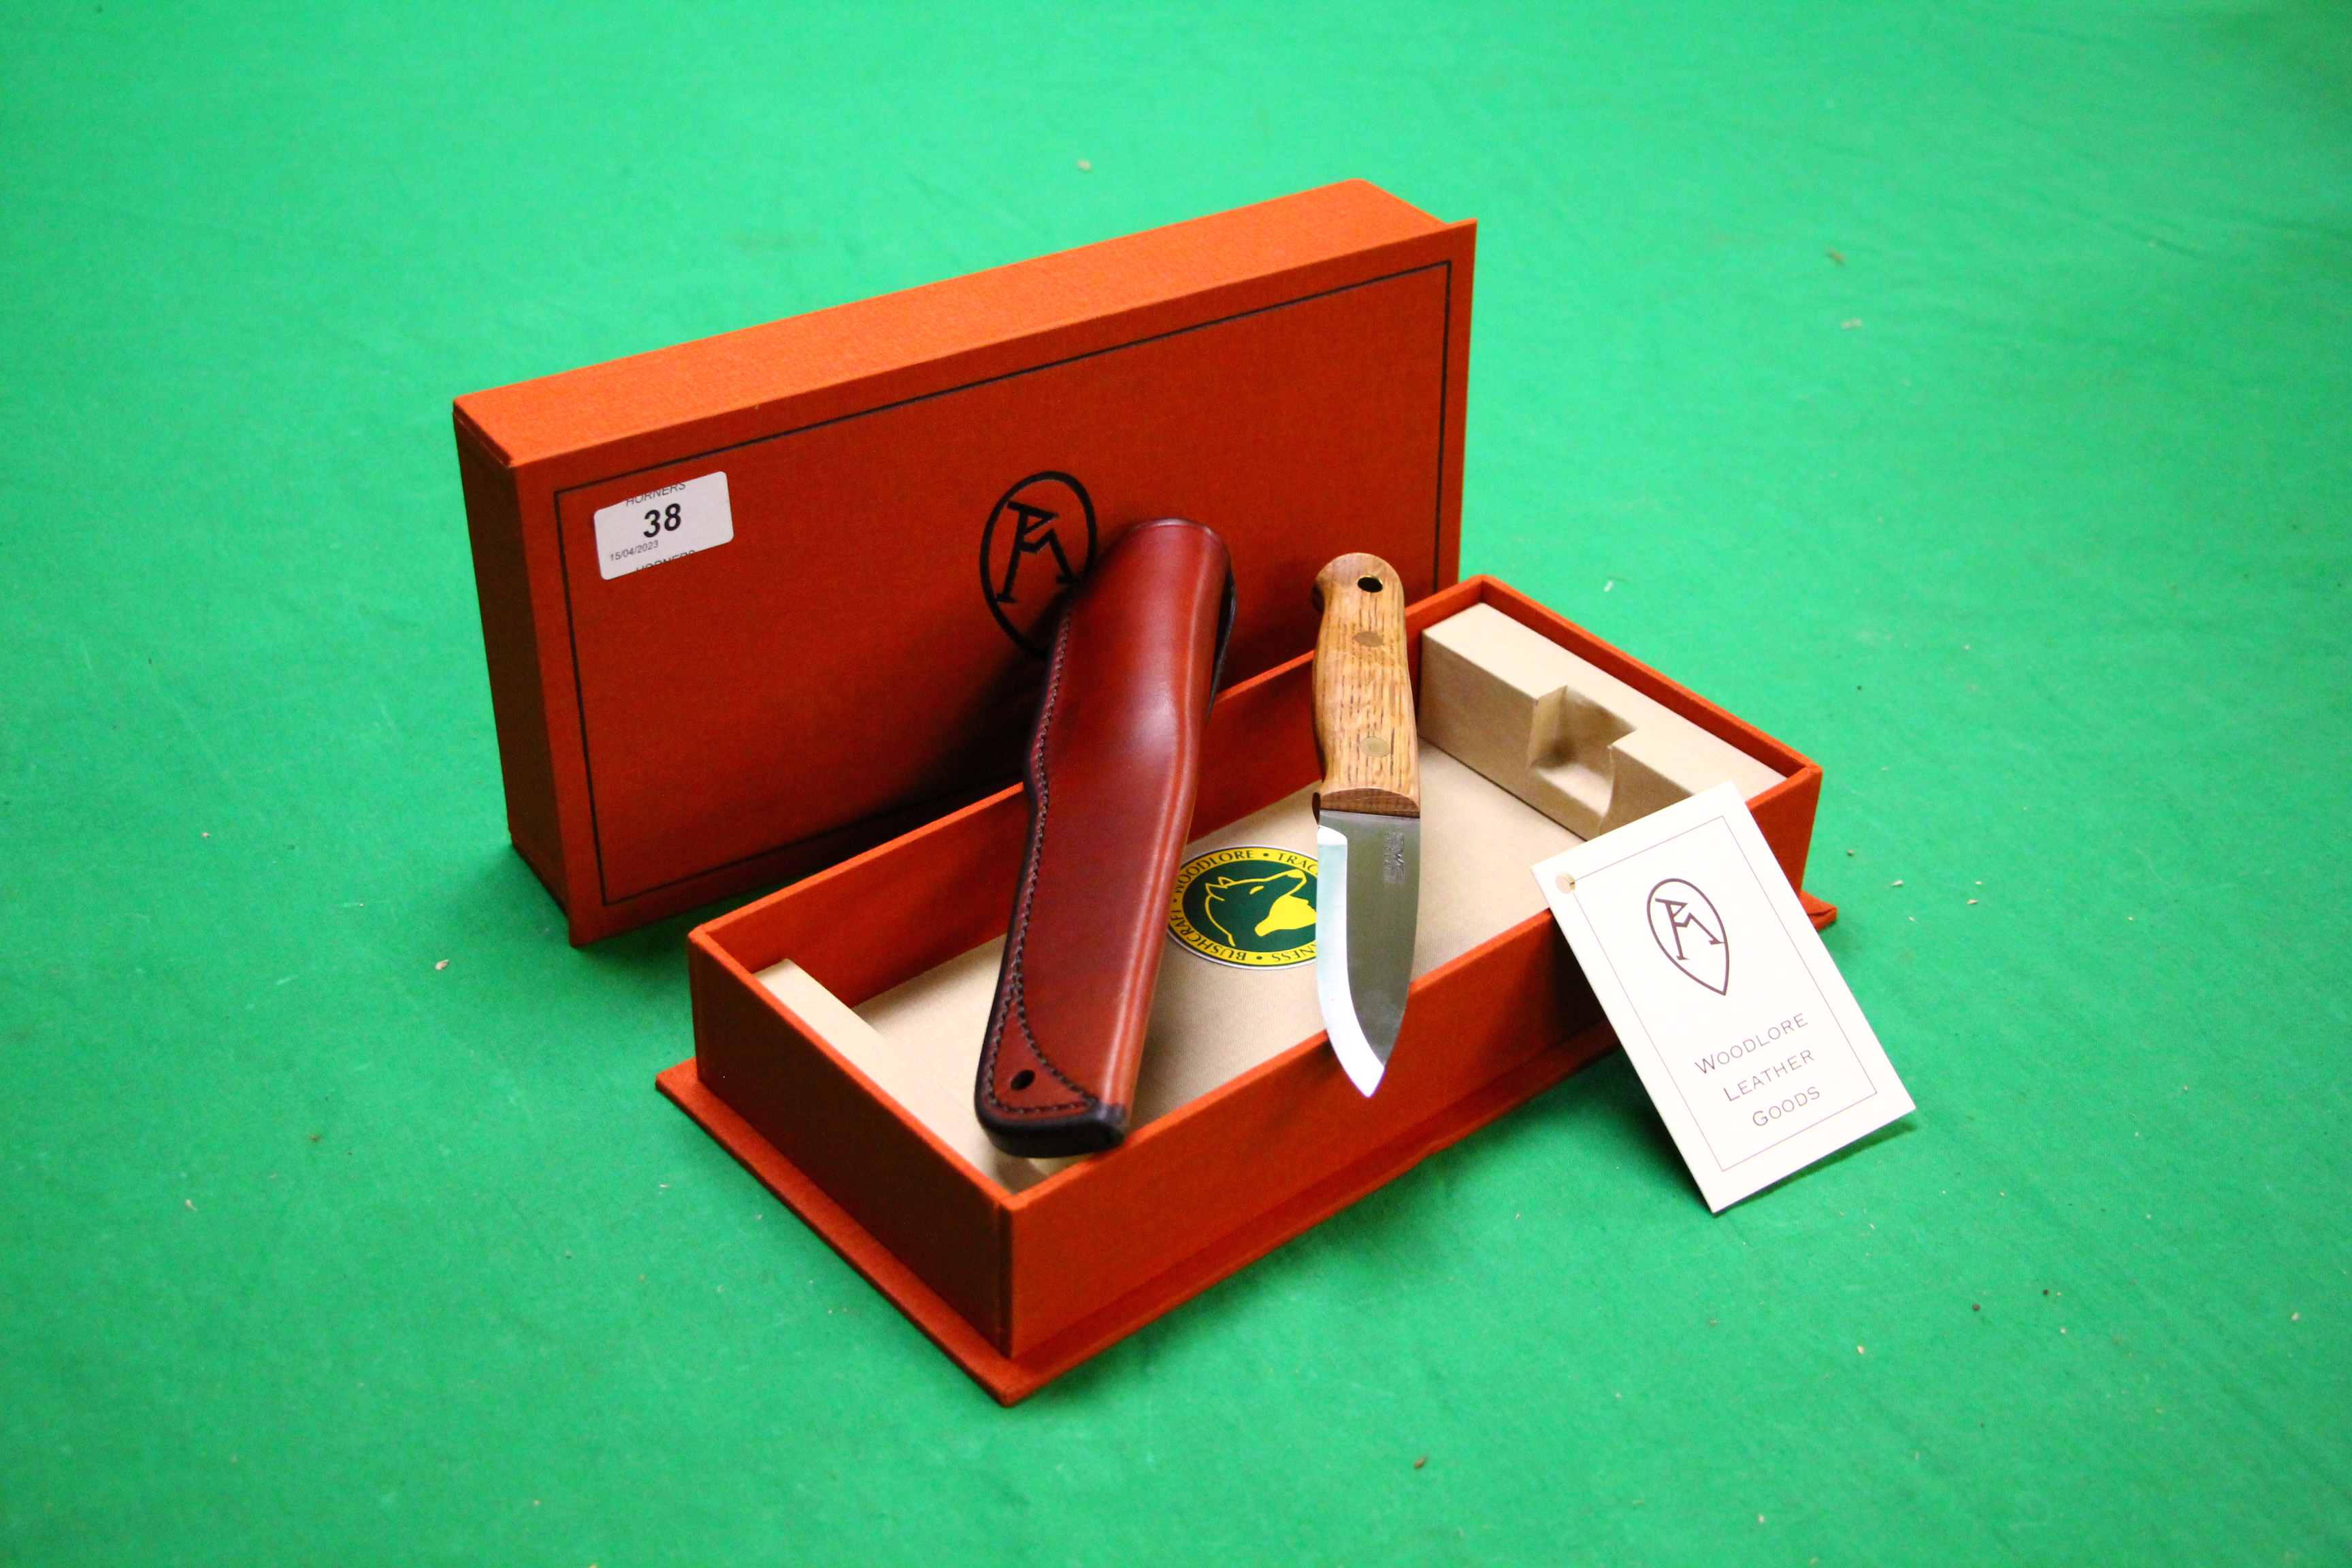 A RAY MEARS BUSHCRAFT KNIFE IN LEATHER SHEATH COMPLETE WITH ORIGINAL PRESENTATION BOX AND - Image 7 of 9